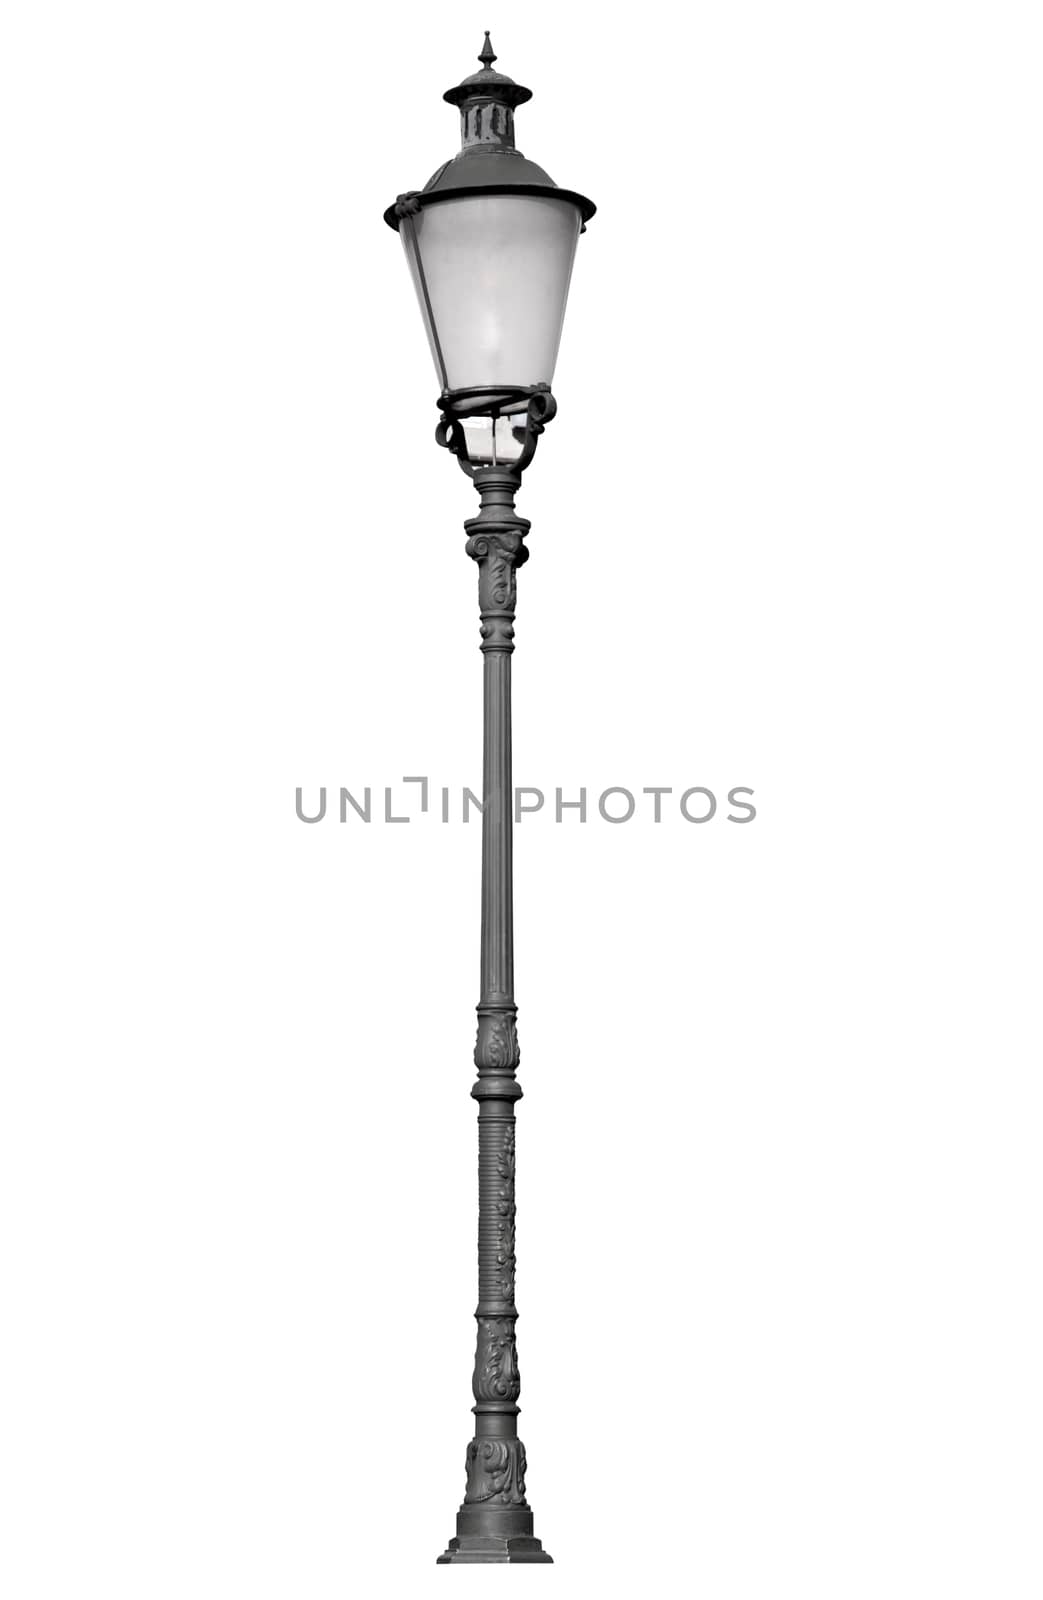 An old street lamppost isolated over white